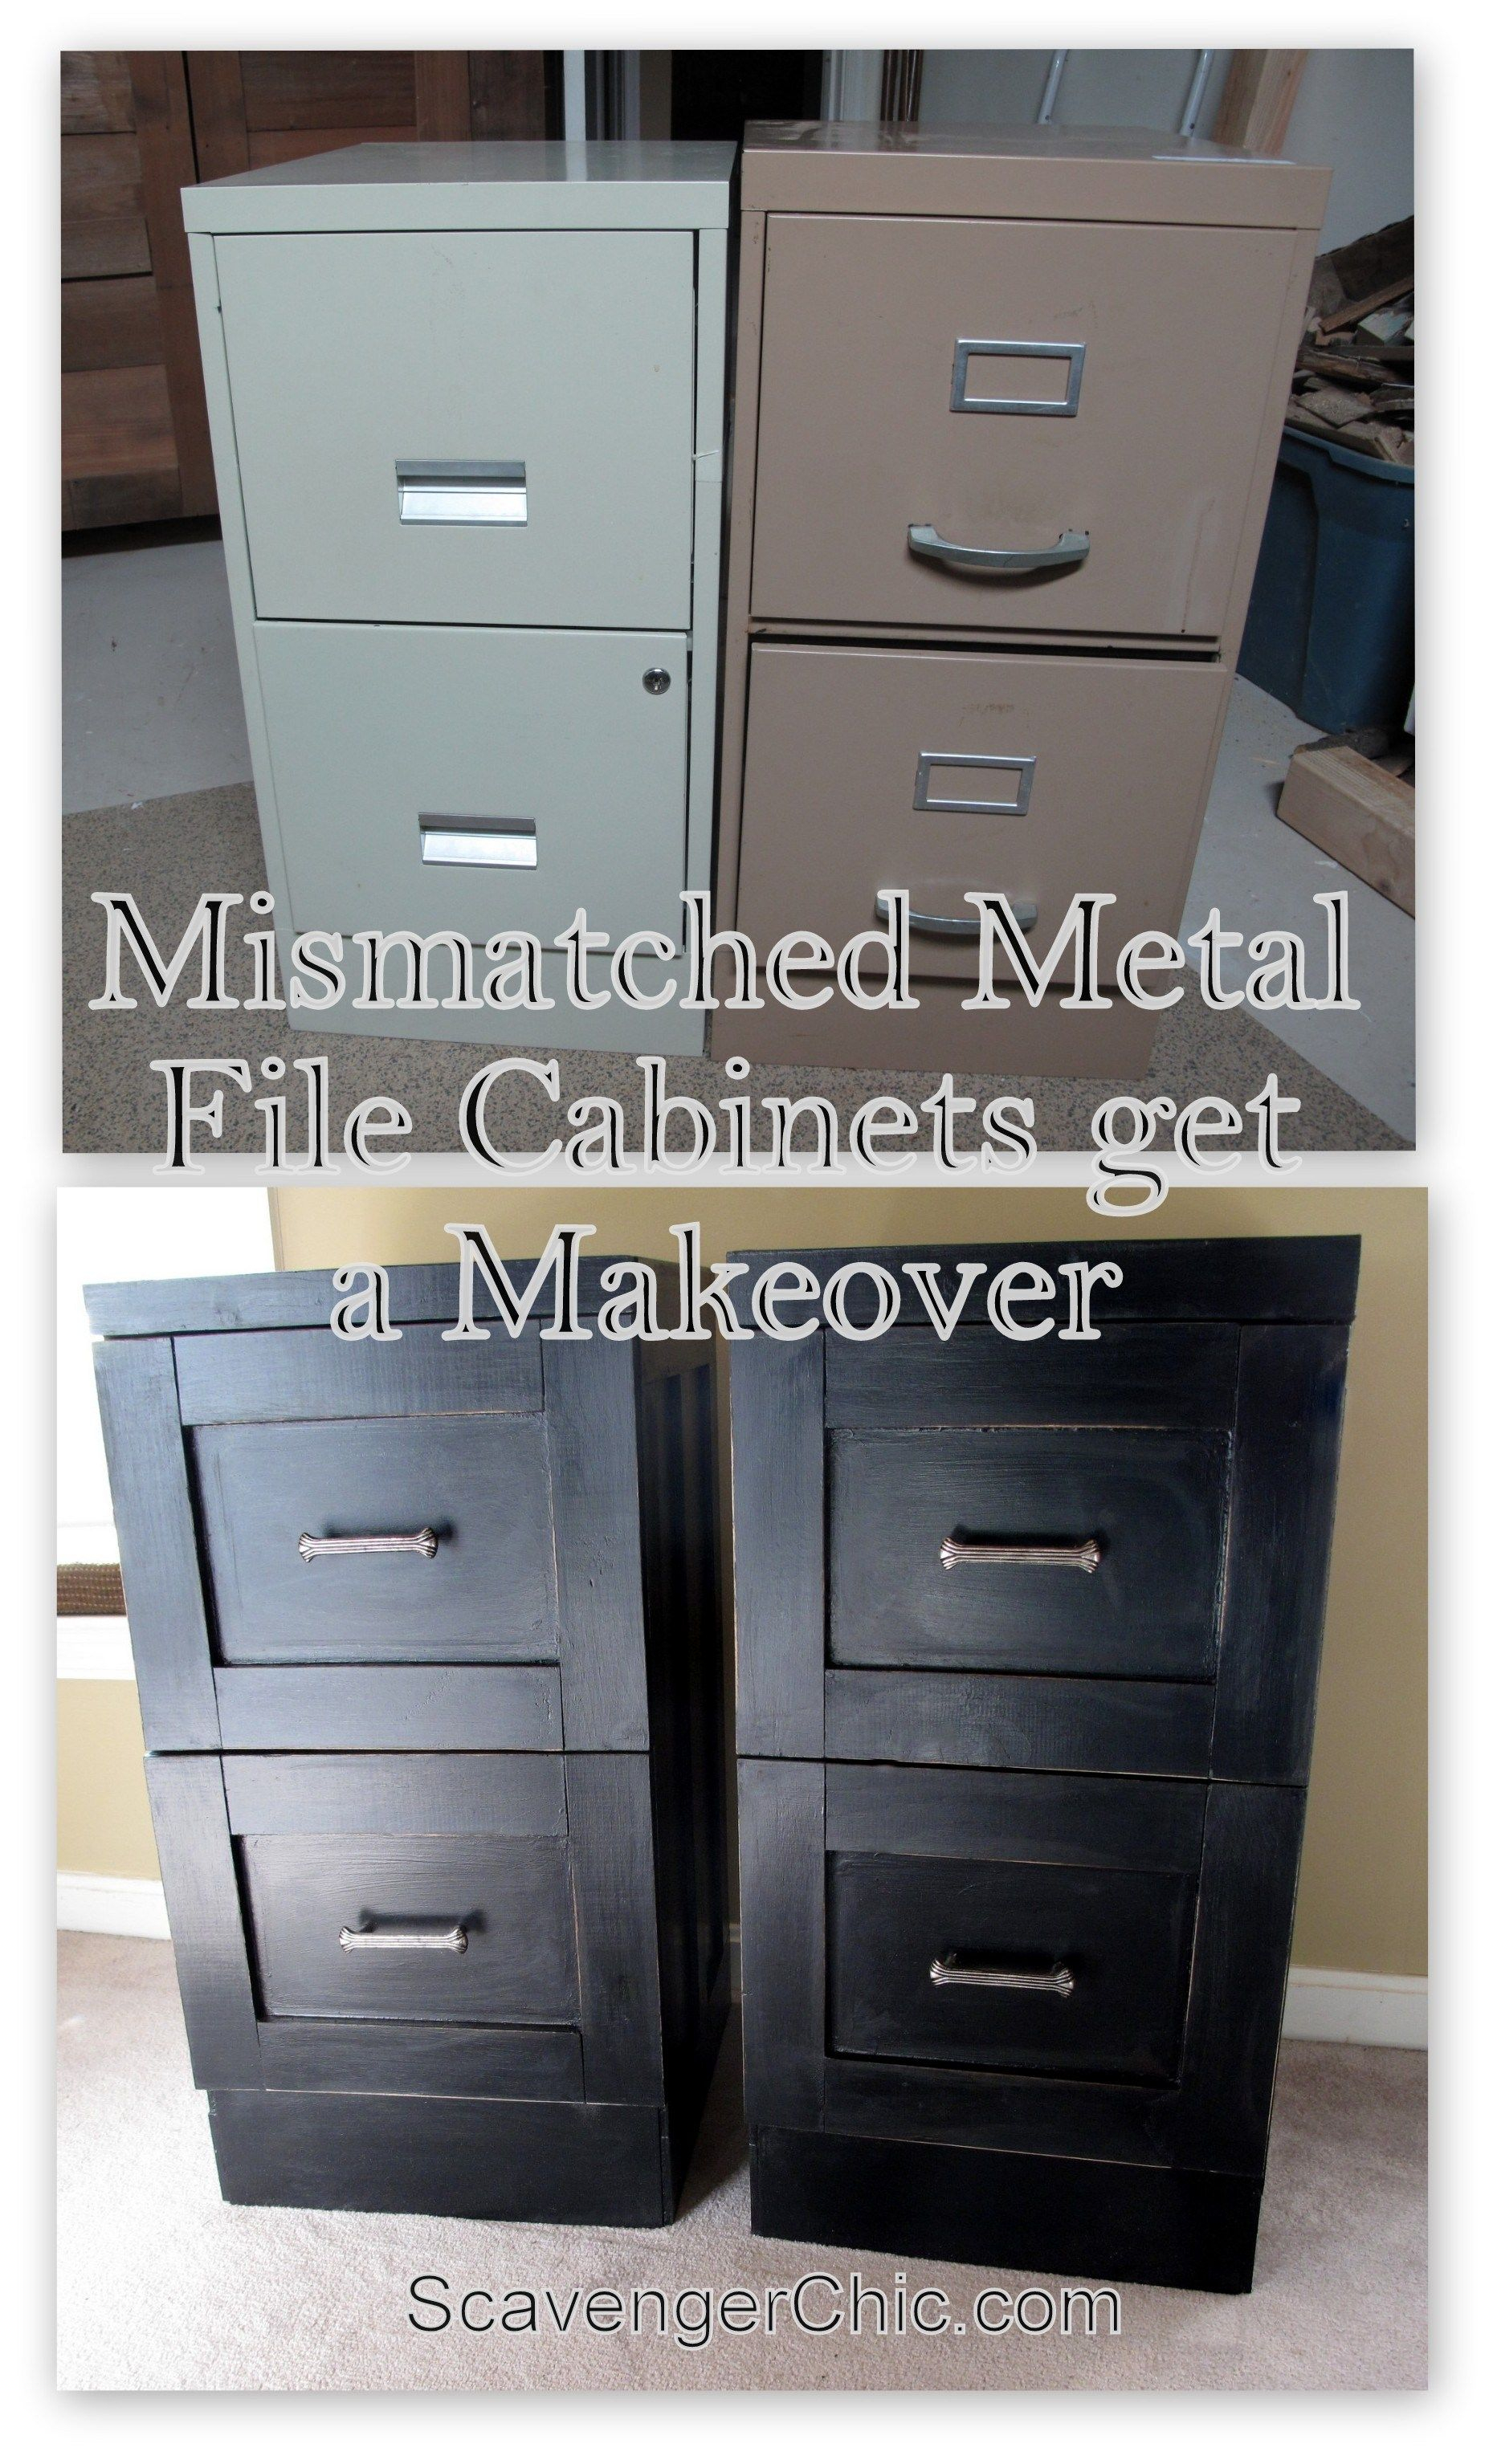 Mismatched Metal File Cabinets Office Decor In 2019 Filing intended for size 1859 X 3069